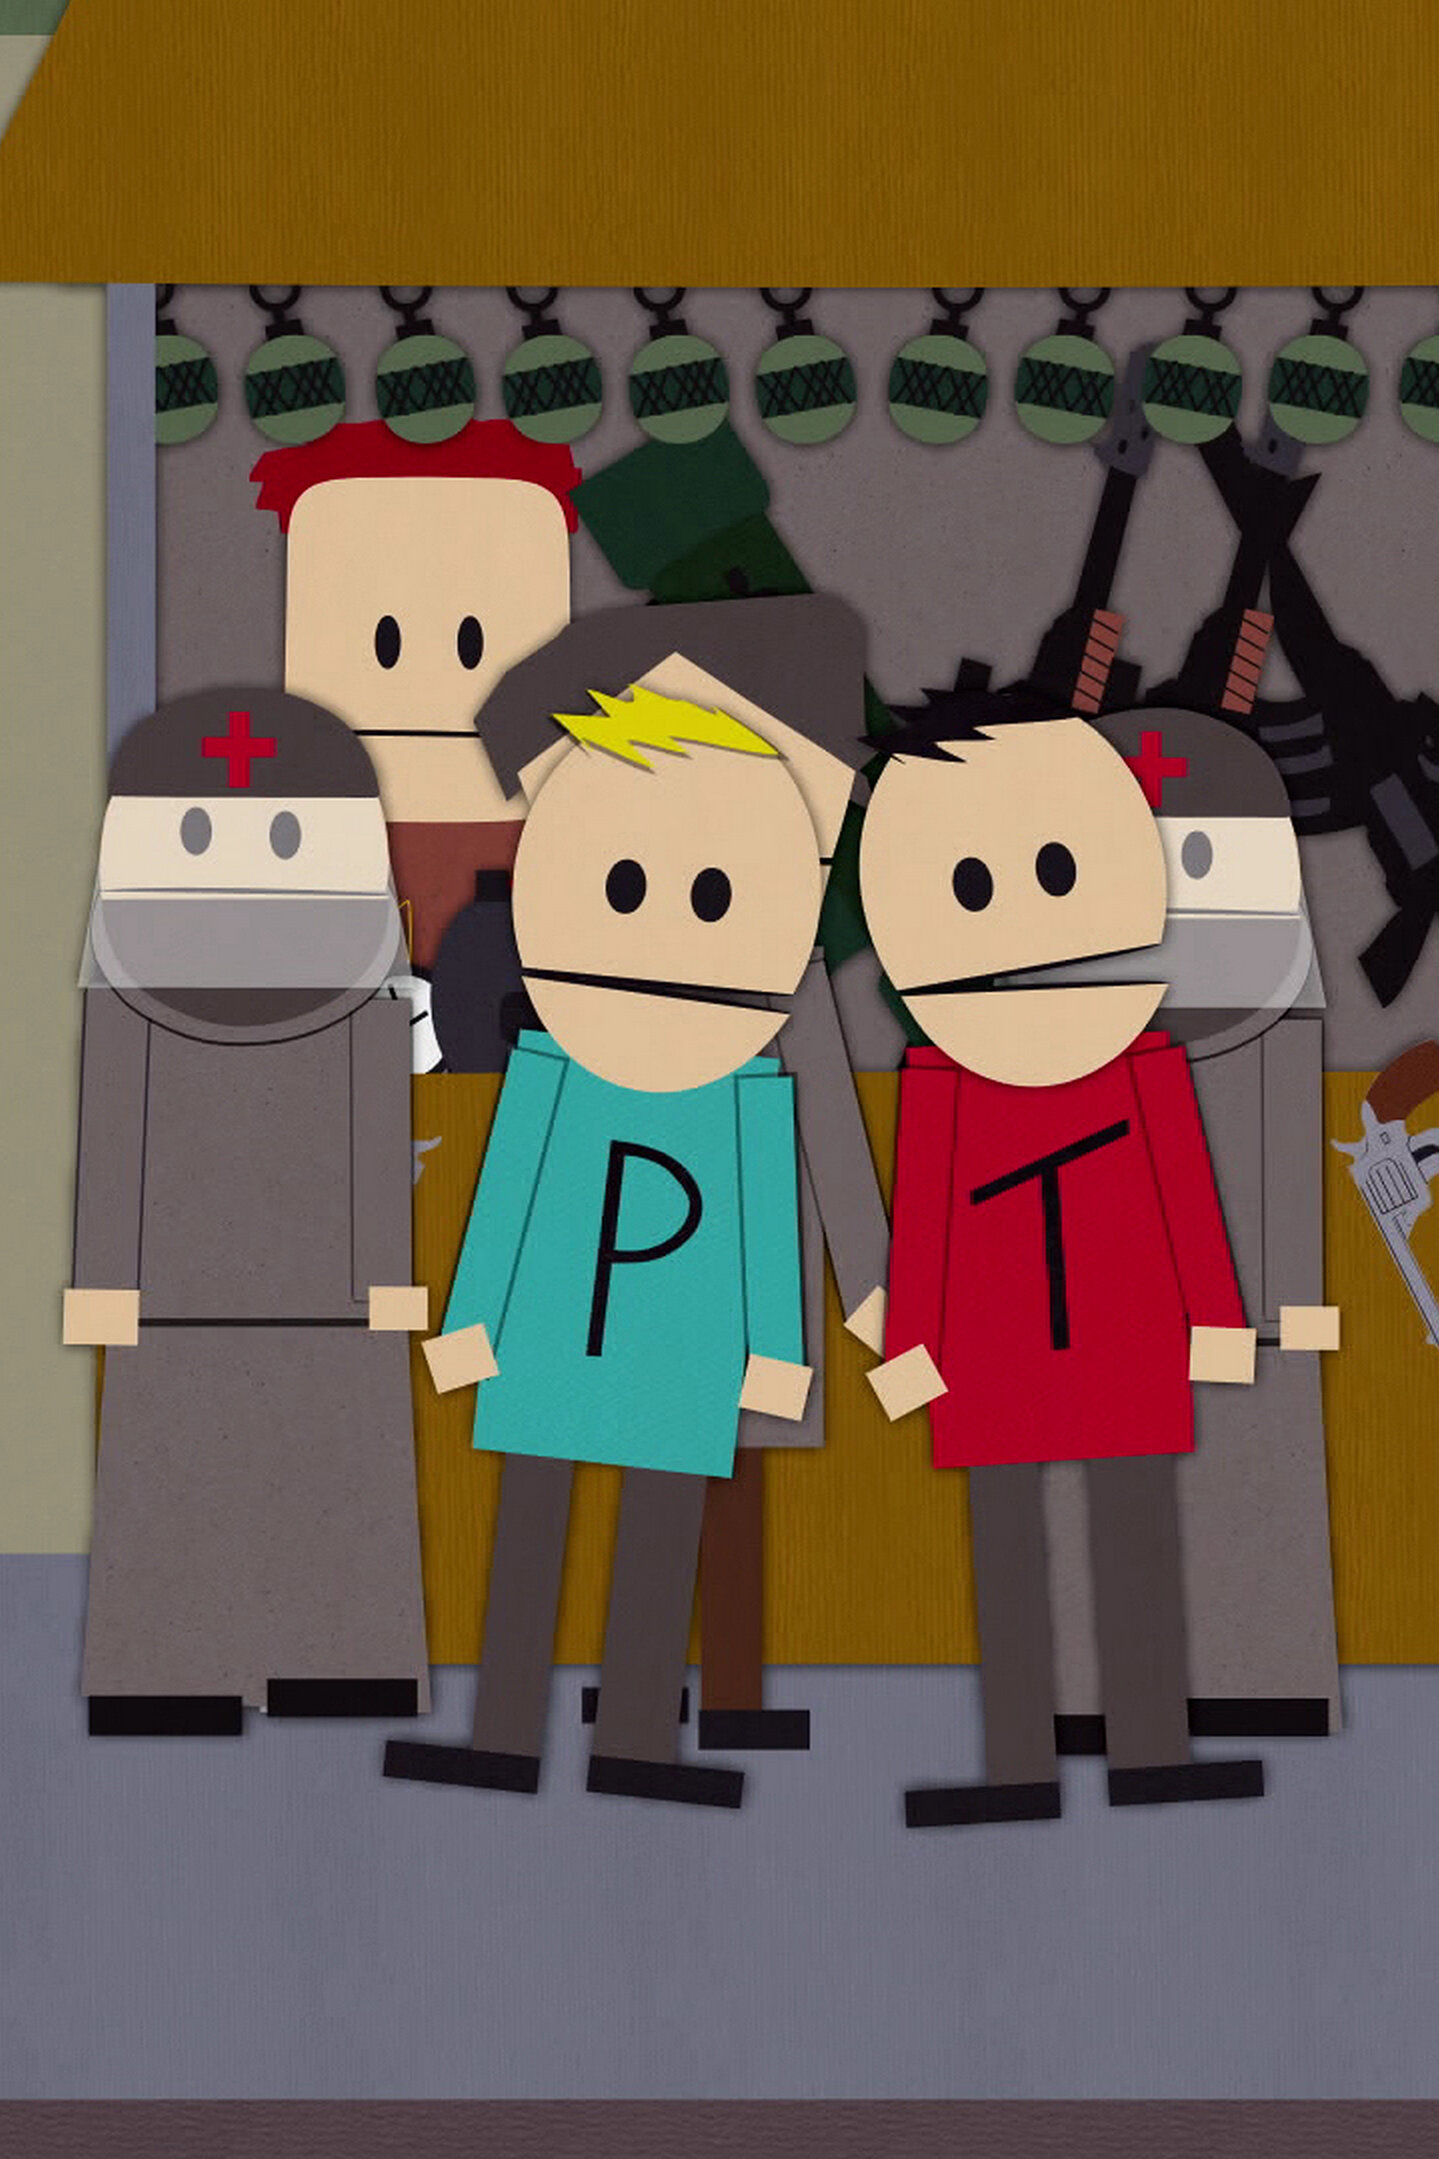 South Park - Terrance and Phillip in Not Without My Anus